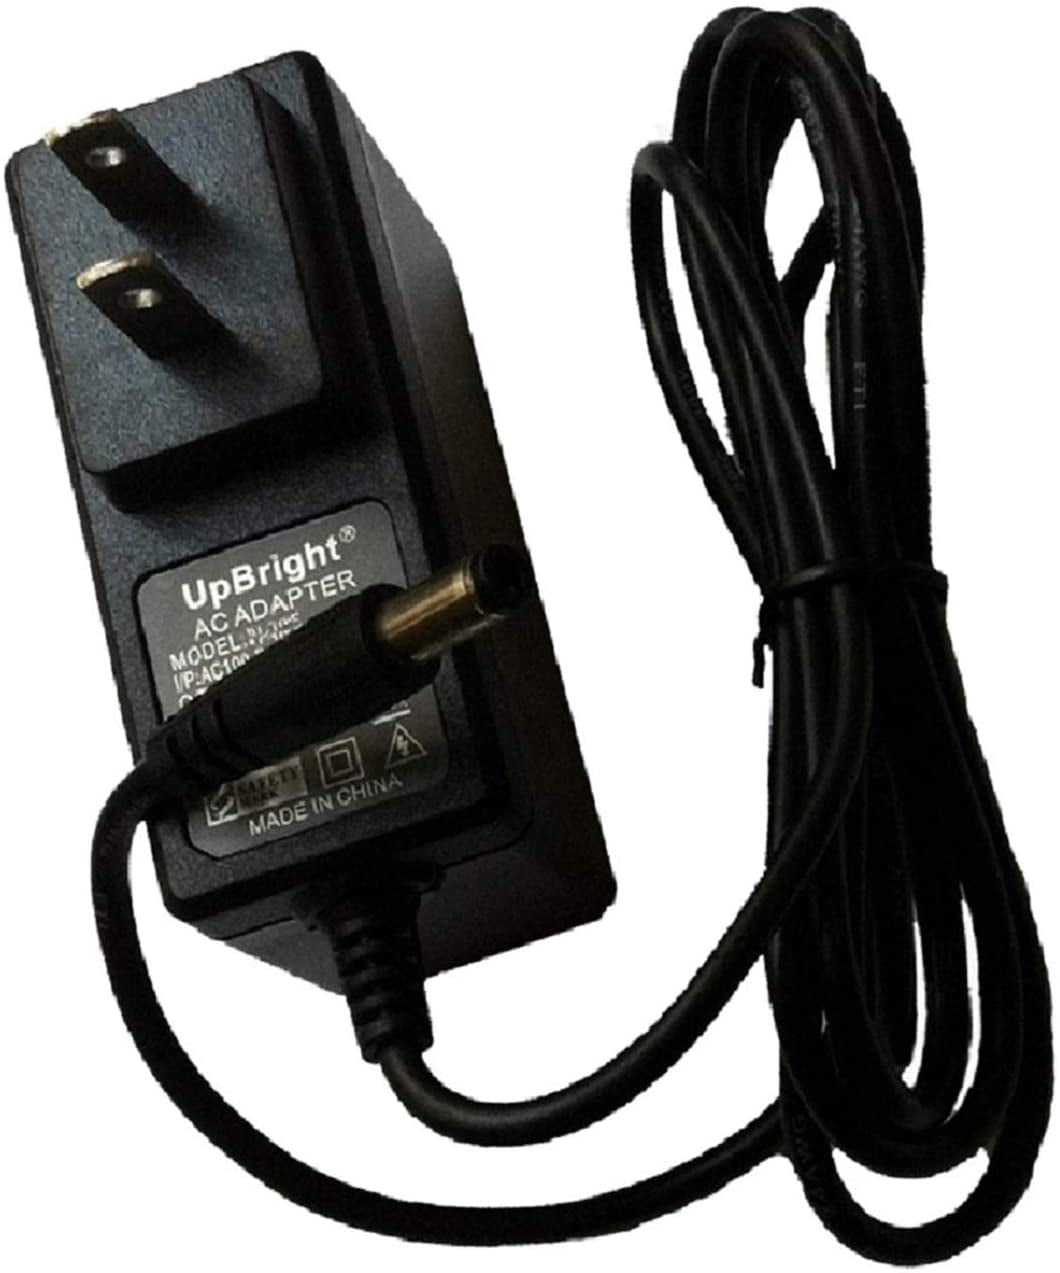 12V AC Adapter For Casio Privia PX-700 PX-575 PX-800 Digital Piano Power Supply 